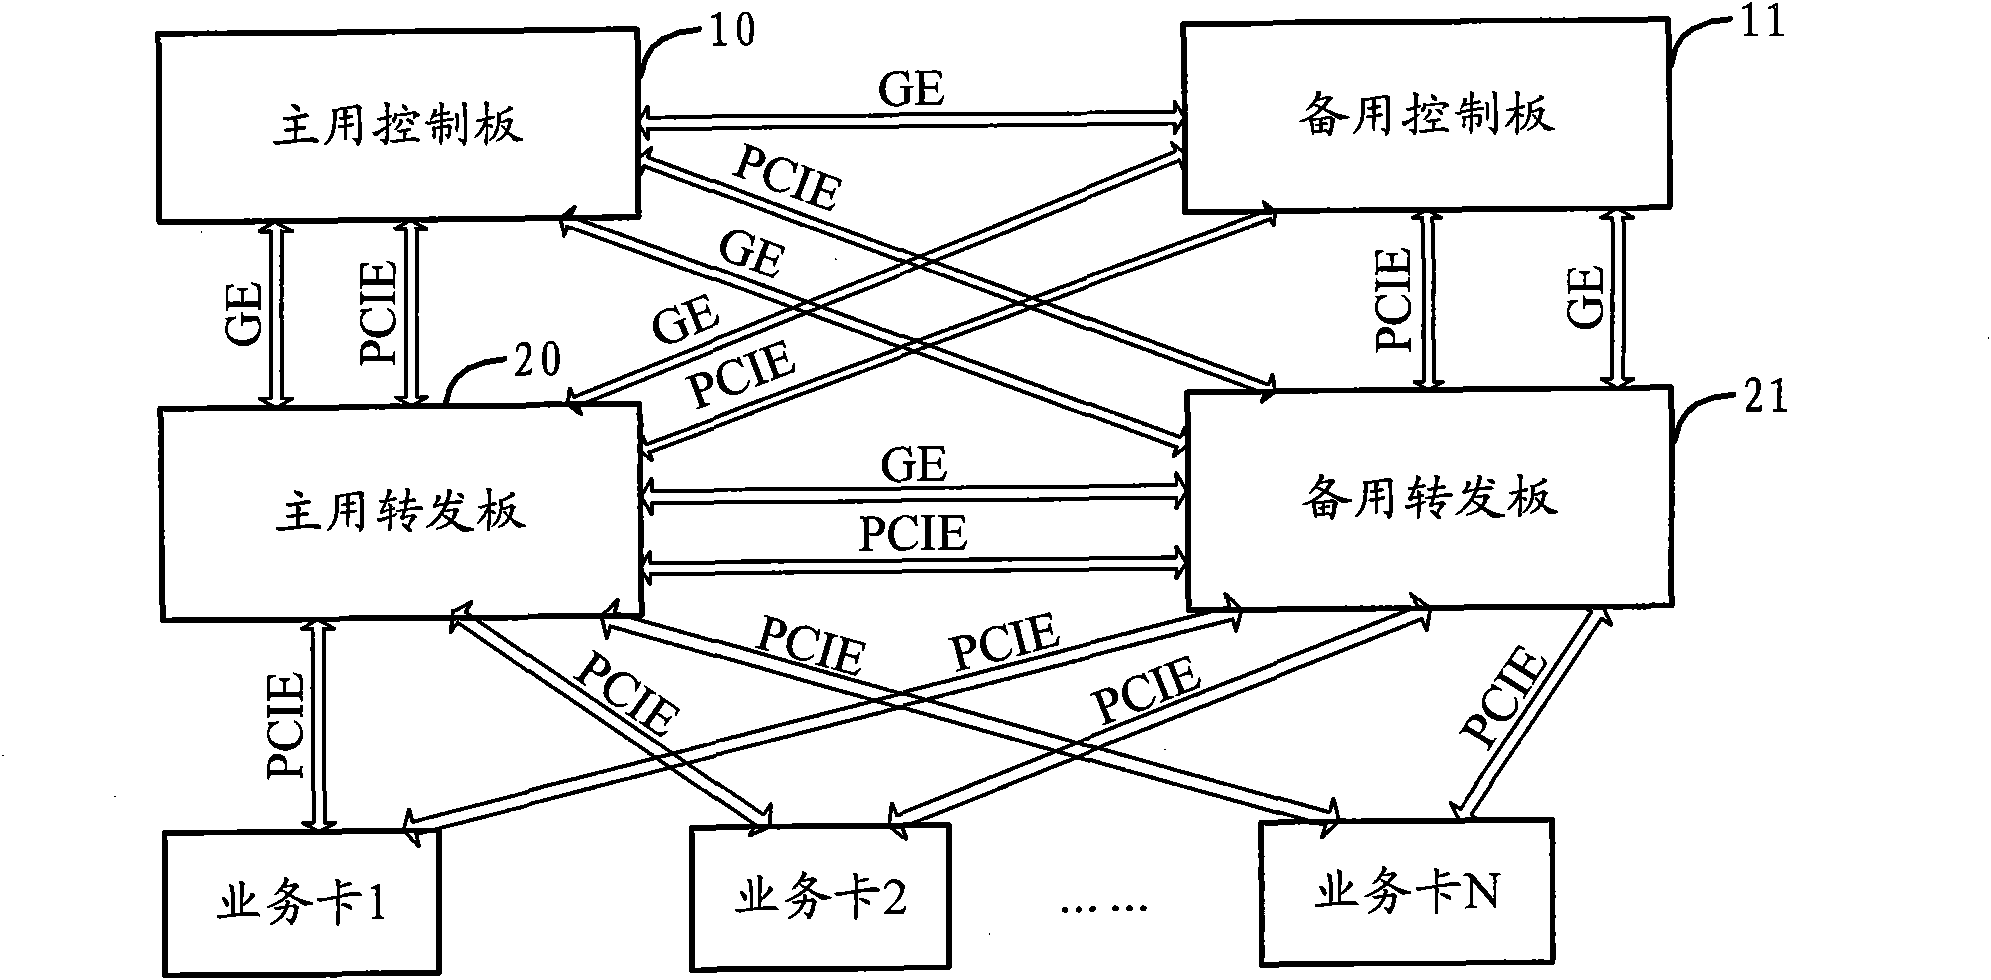 Route retransmission realization device and method, and switching equipment